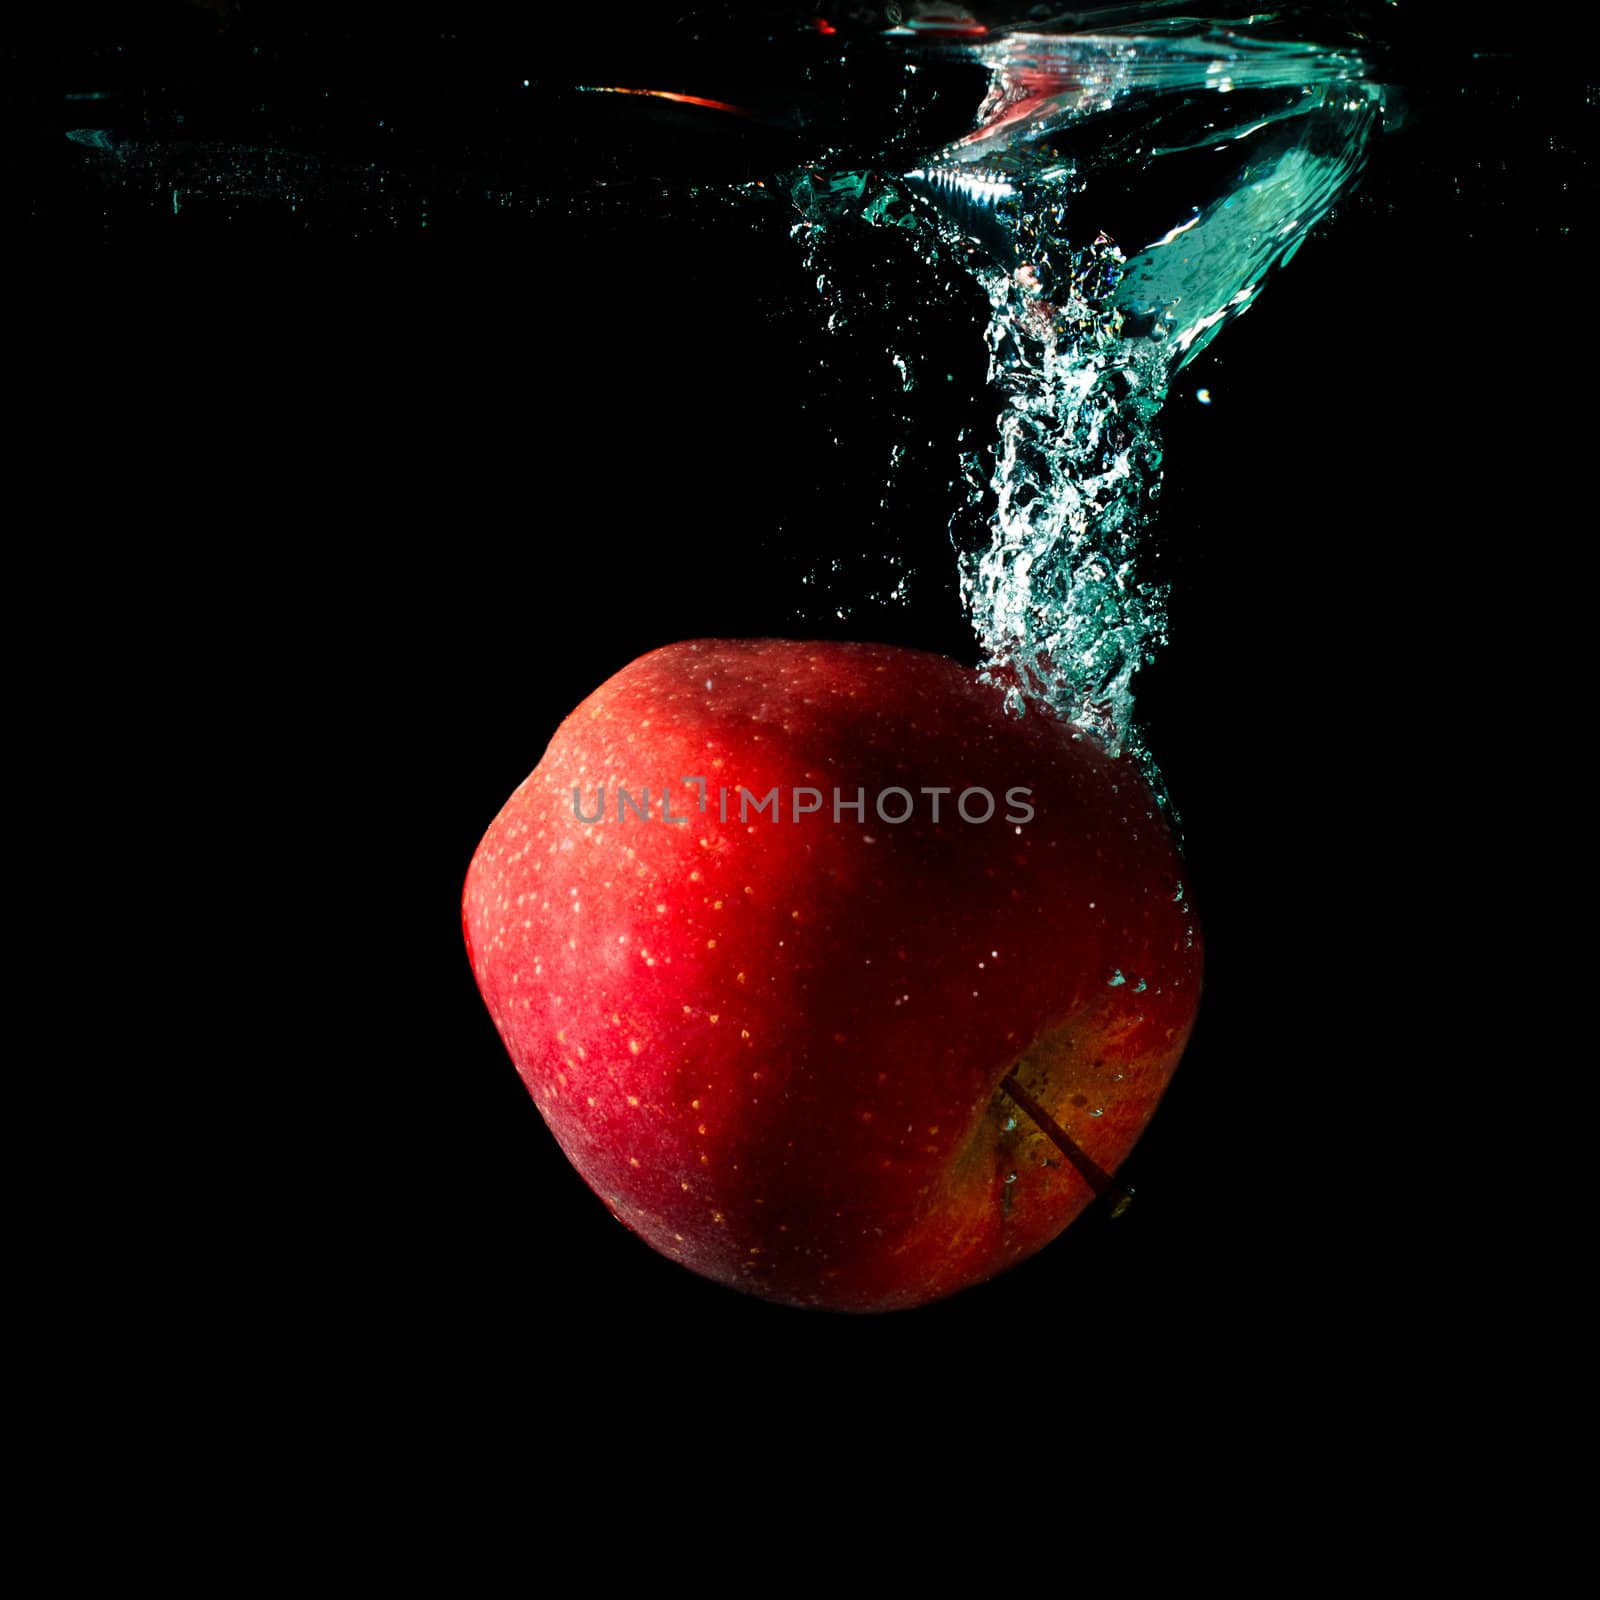 apple falling to water with splash over black background